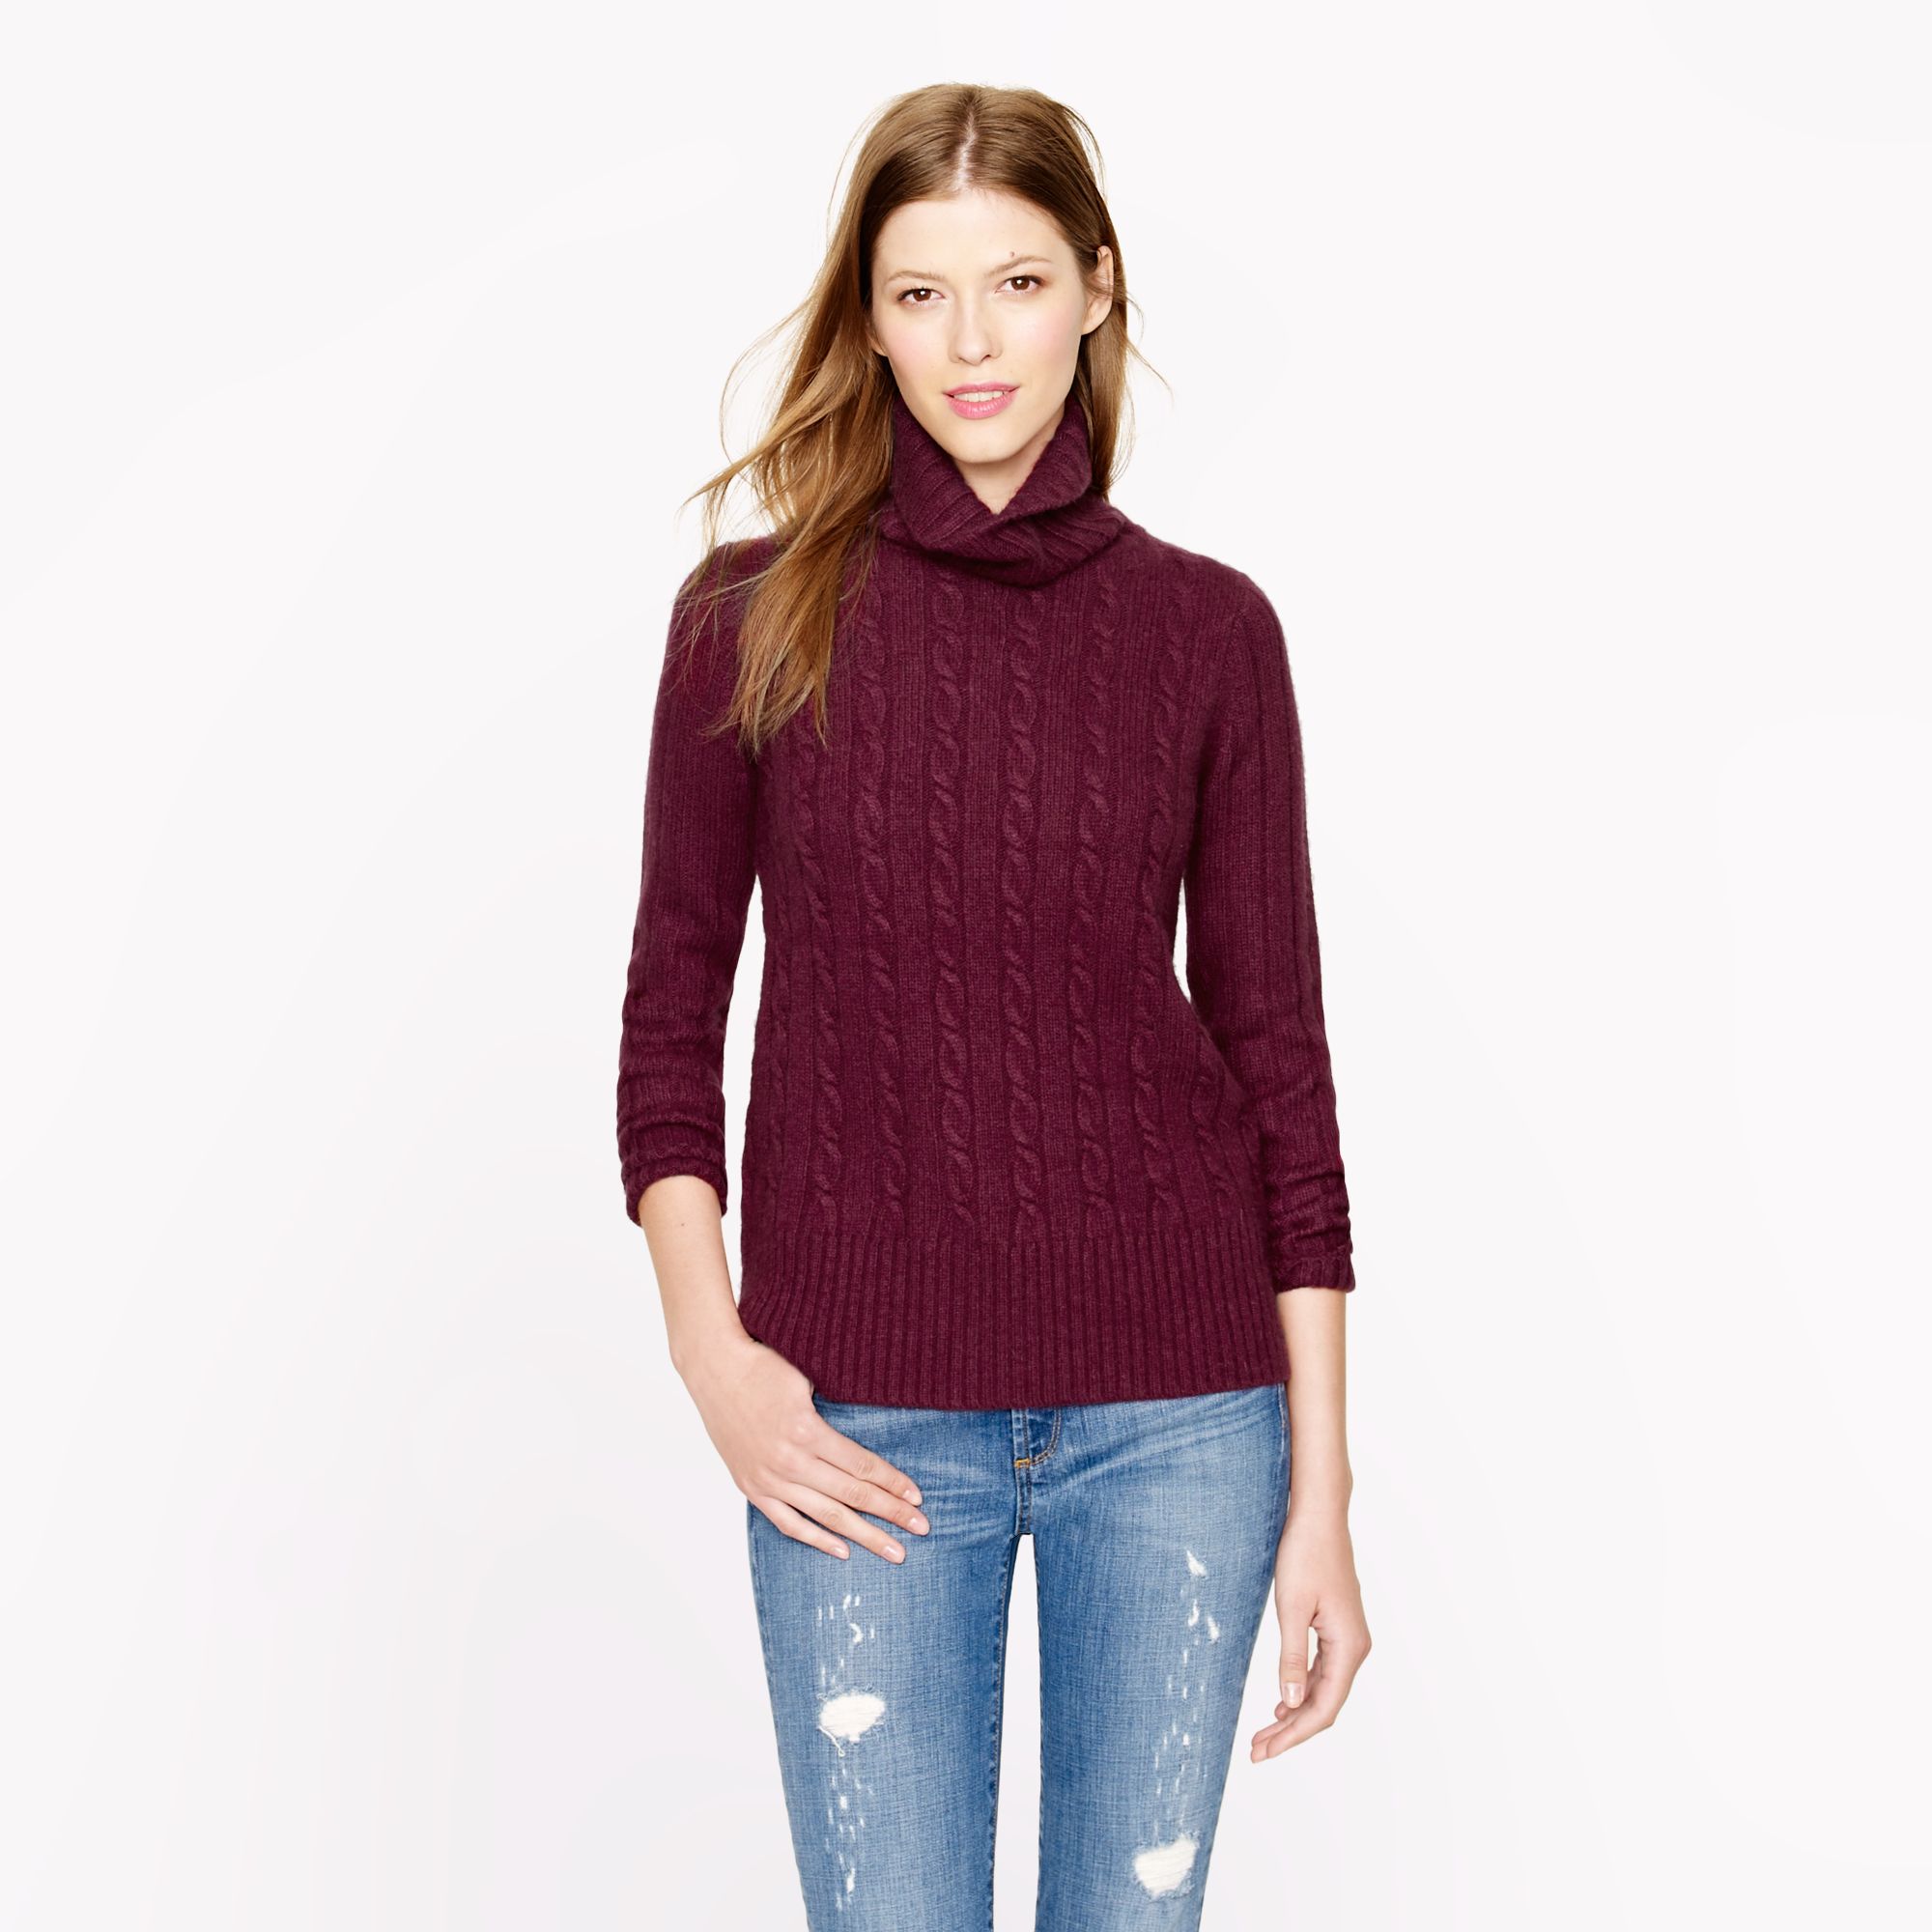 Lyst - J.Crew Preorder Cambridge Cable Chunky Turtleneck Sweater in Purple